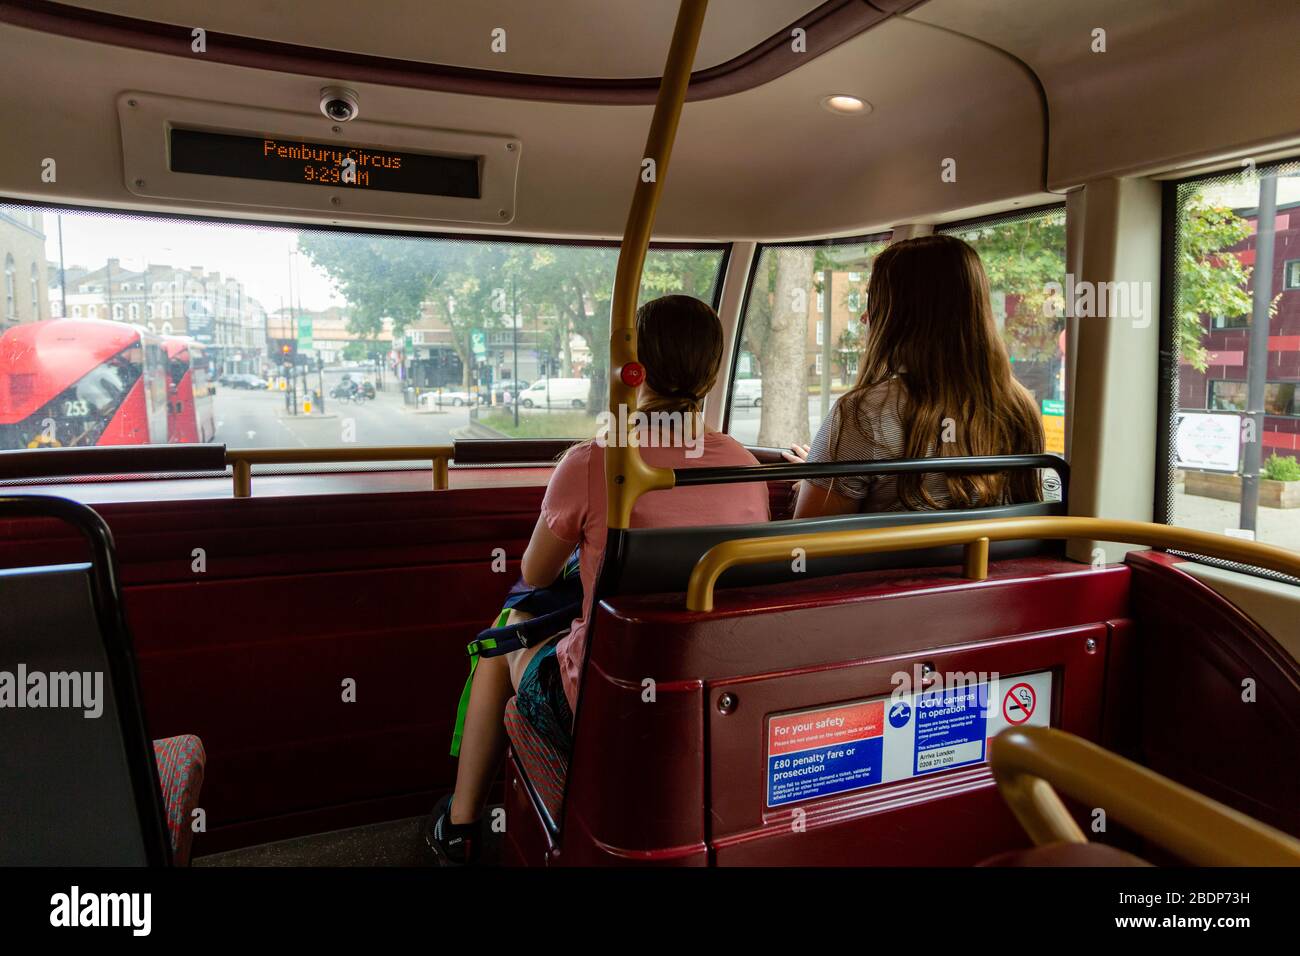 Two young girls sit at the front on the top deck of a double decker bus in London, England. Stock Photo